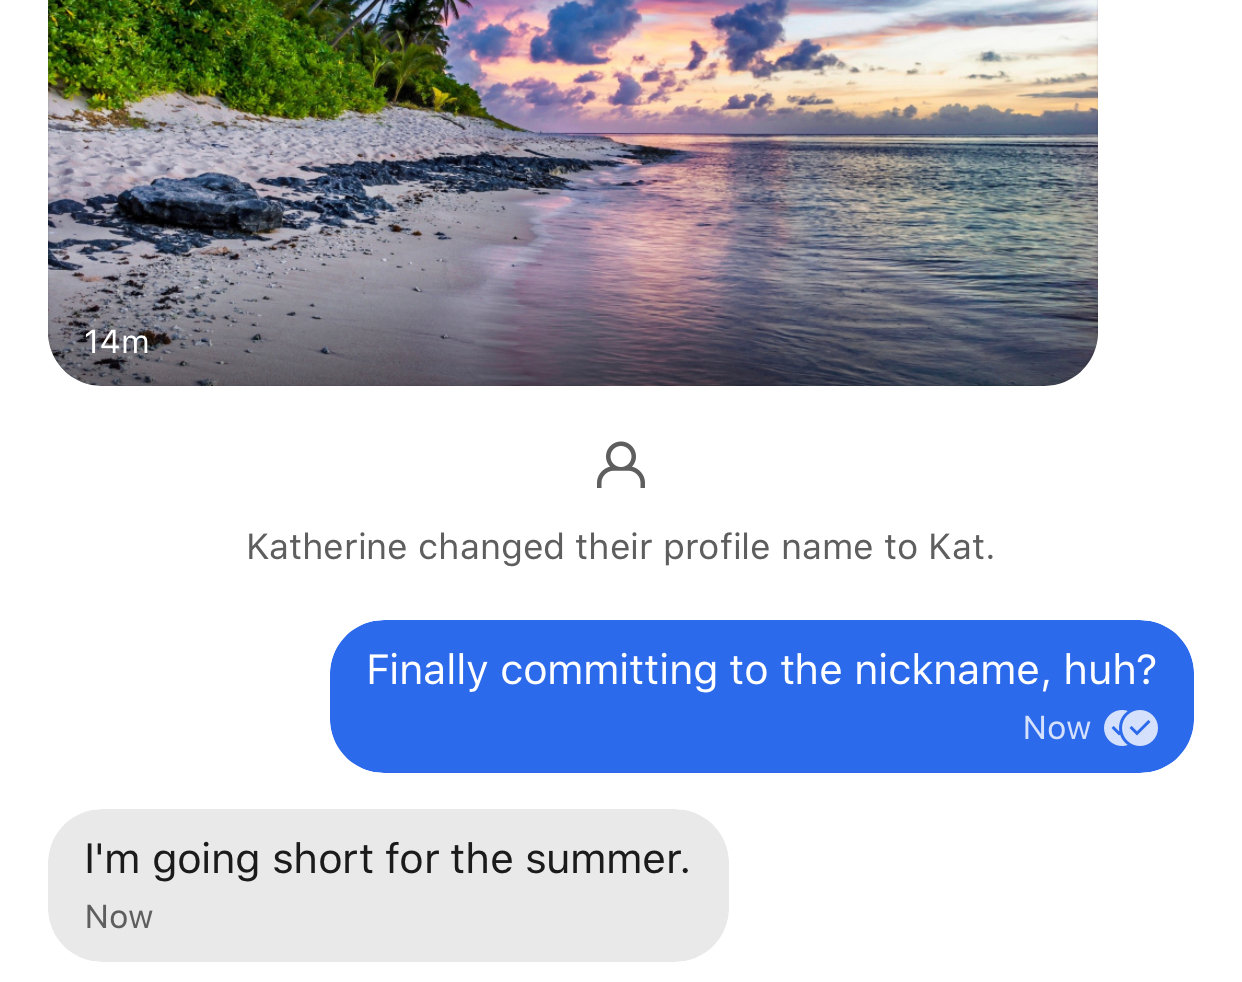 Screenshot of a conversation thread where 'Katherine' has changed their profile name to 'Kat' Person 1: 'Finally committing to the nickname, huh?' Person 2: 'I'm going short for the summer.'